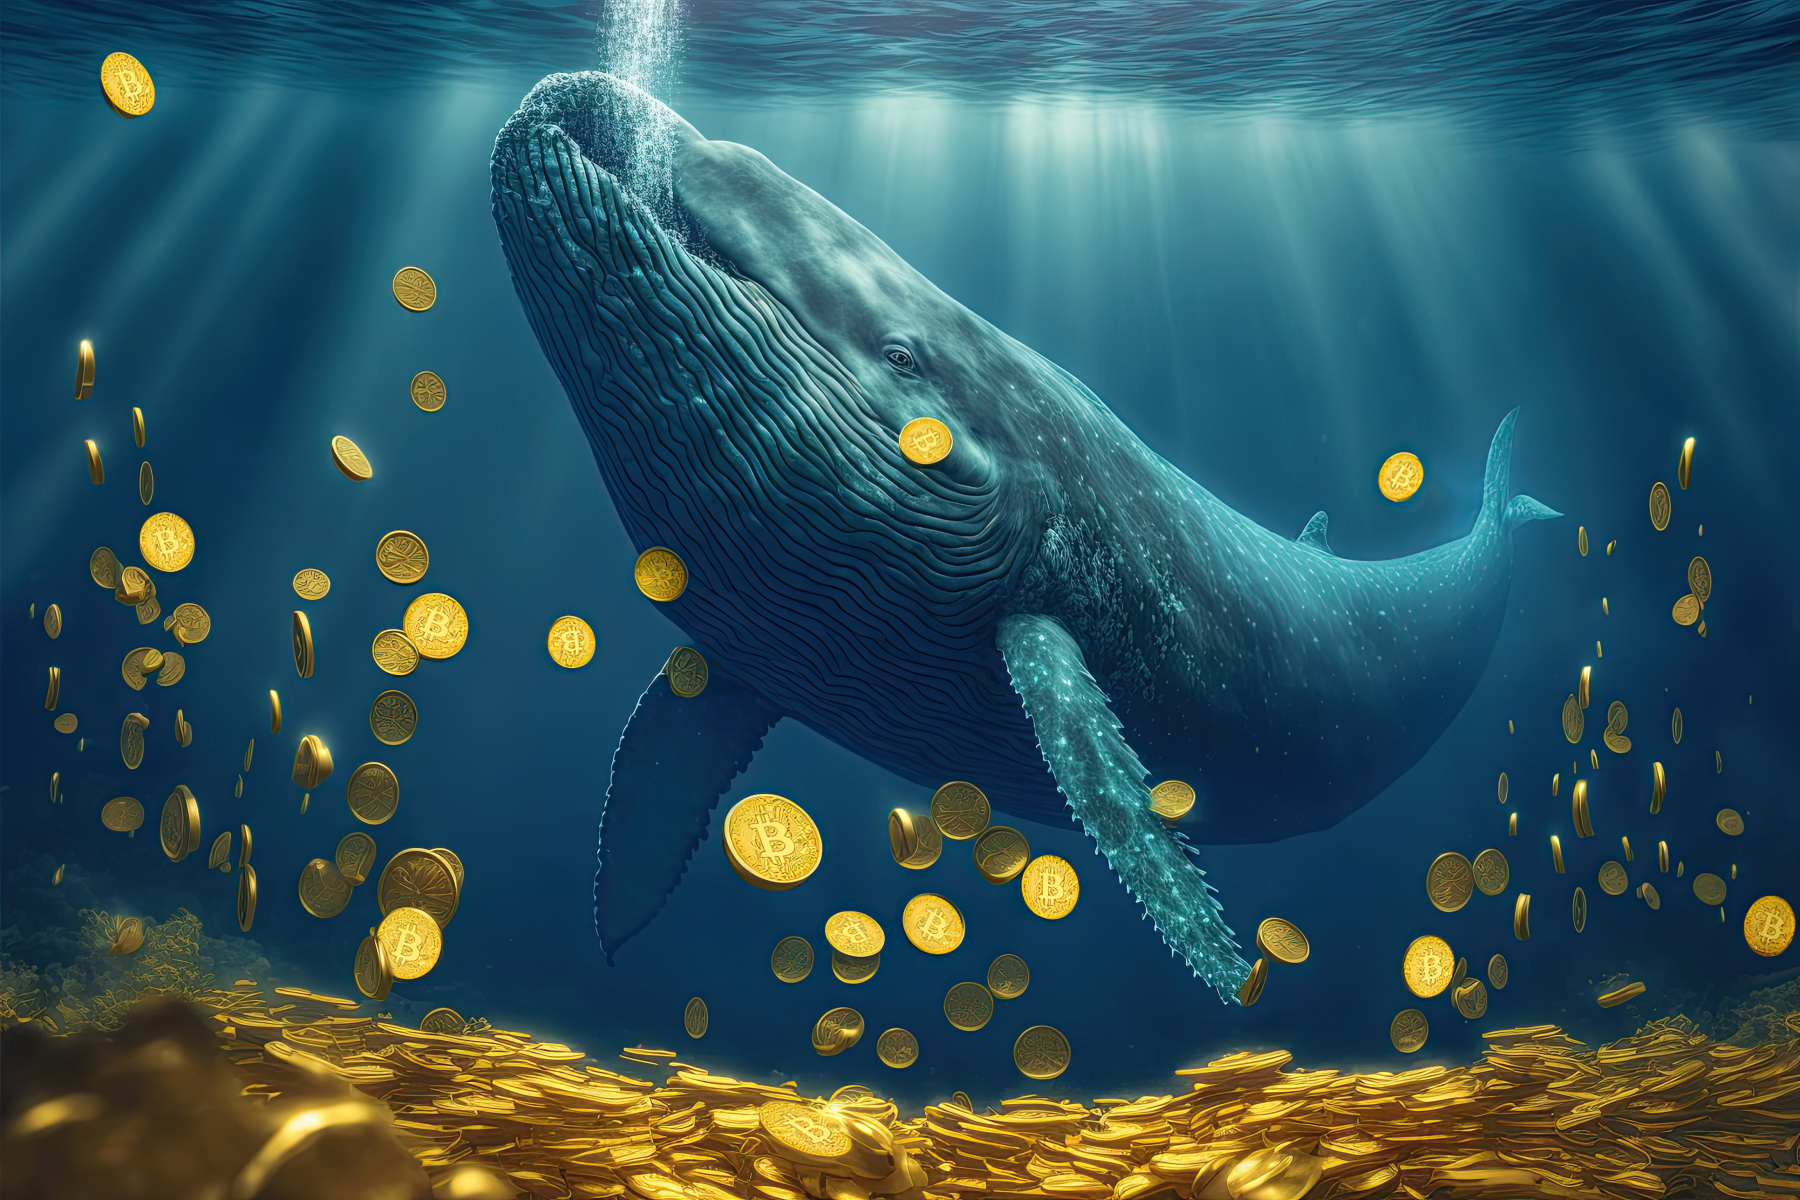 Whale wakes up and sends $60 million worth of Bitcoin after 9 years
